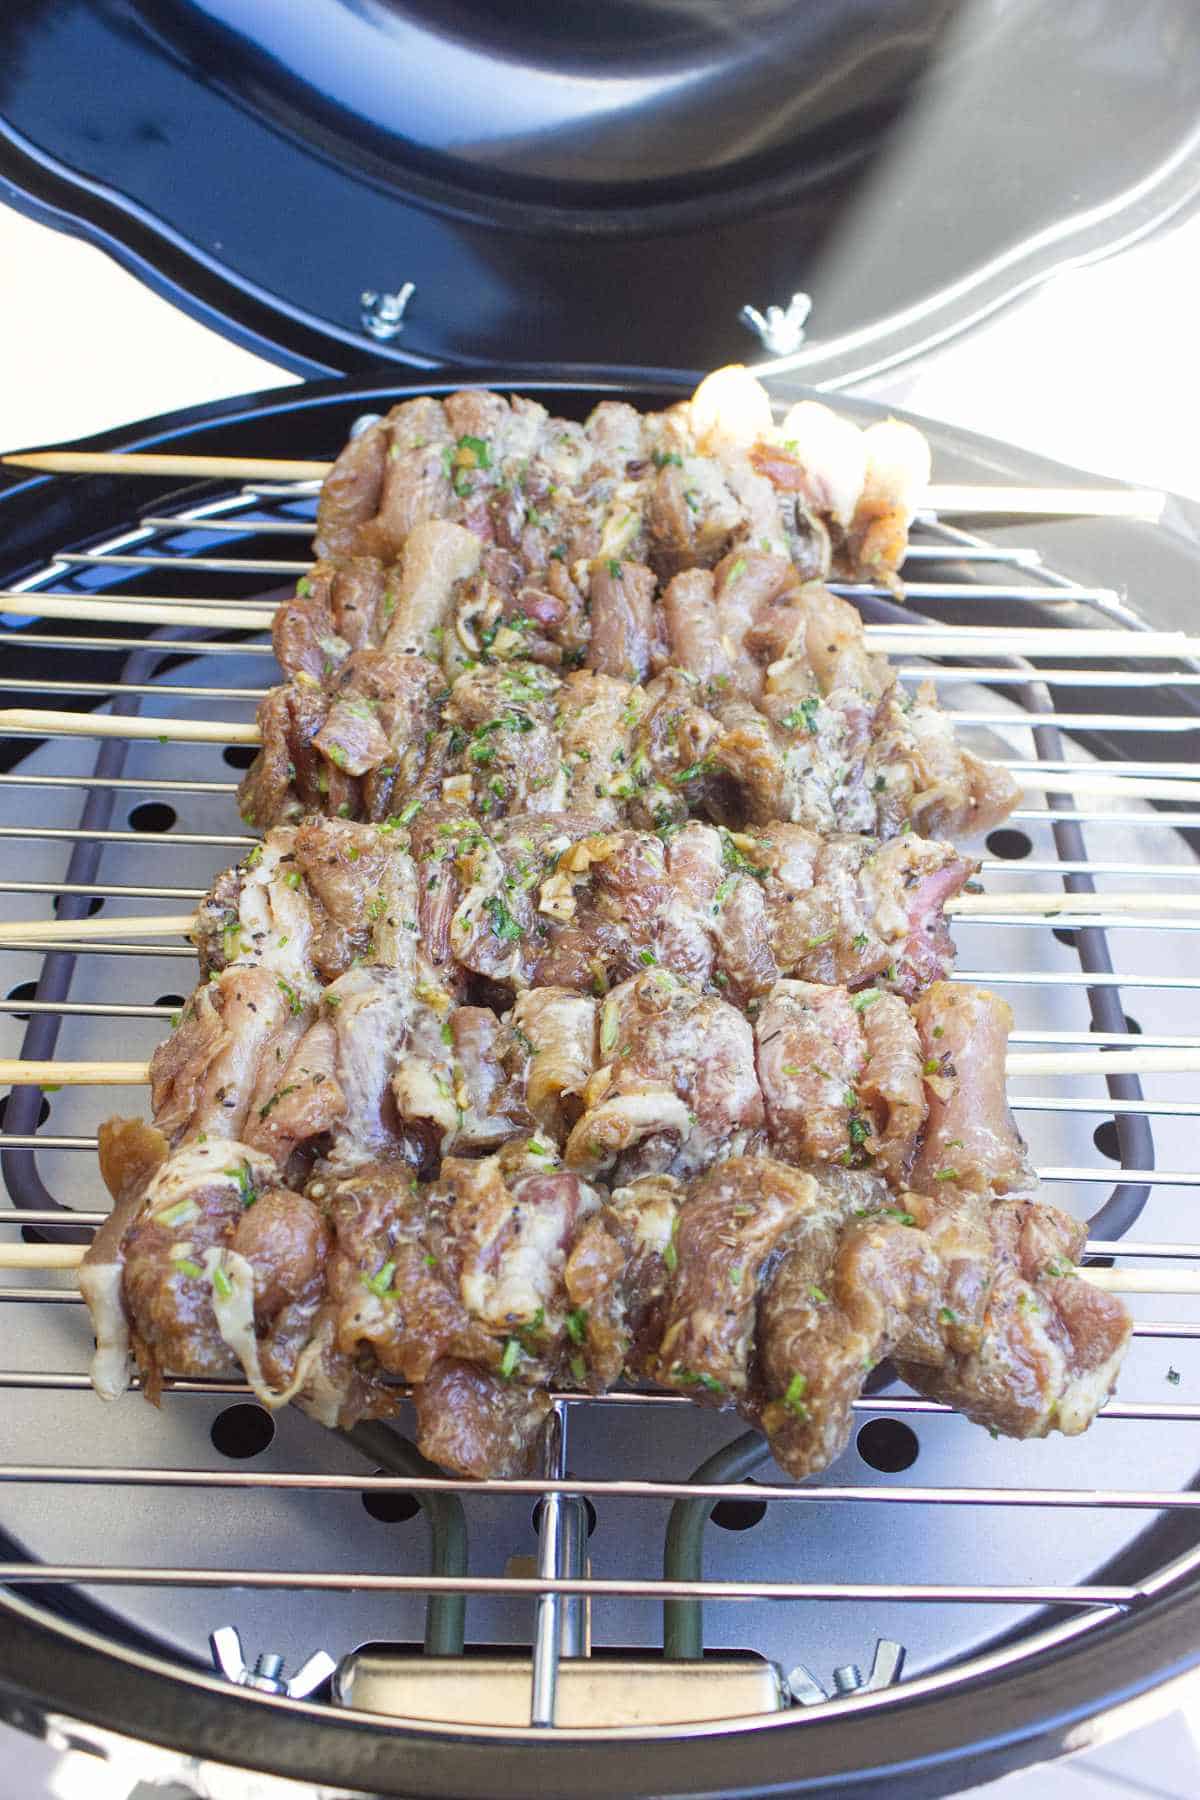 Thai pork skewers grilling on an electric grill.